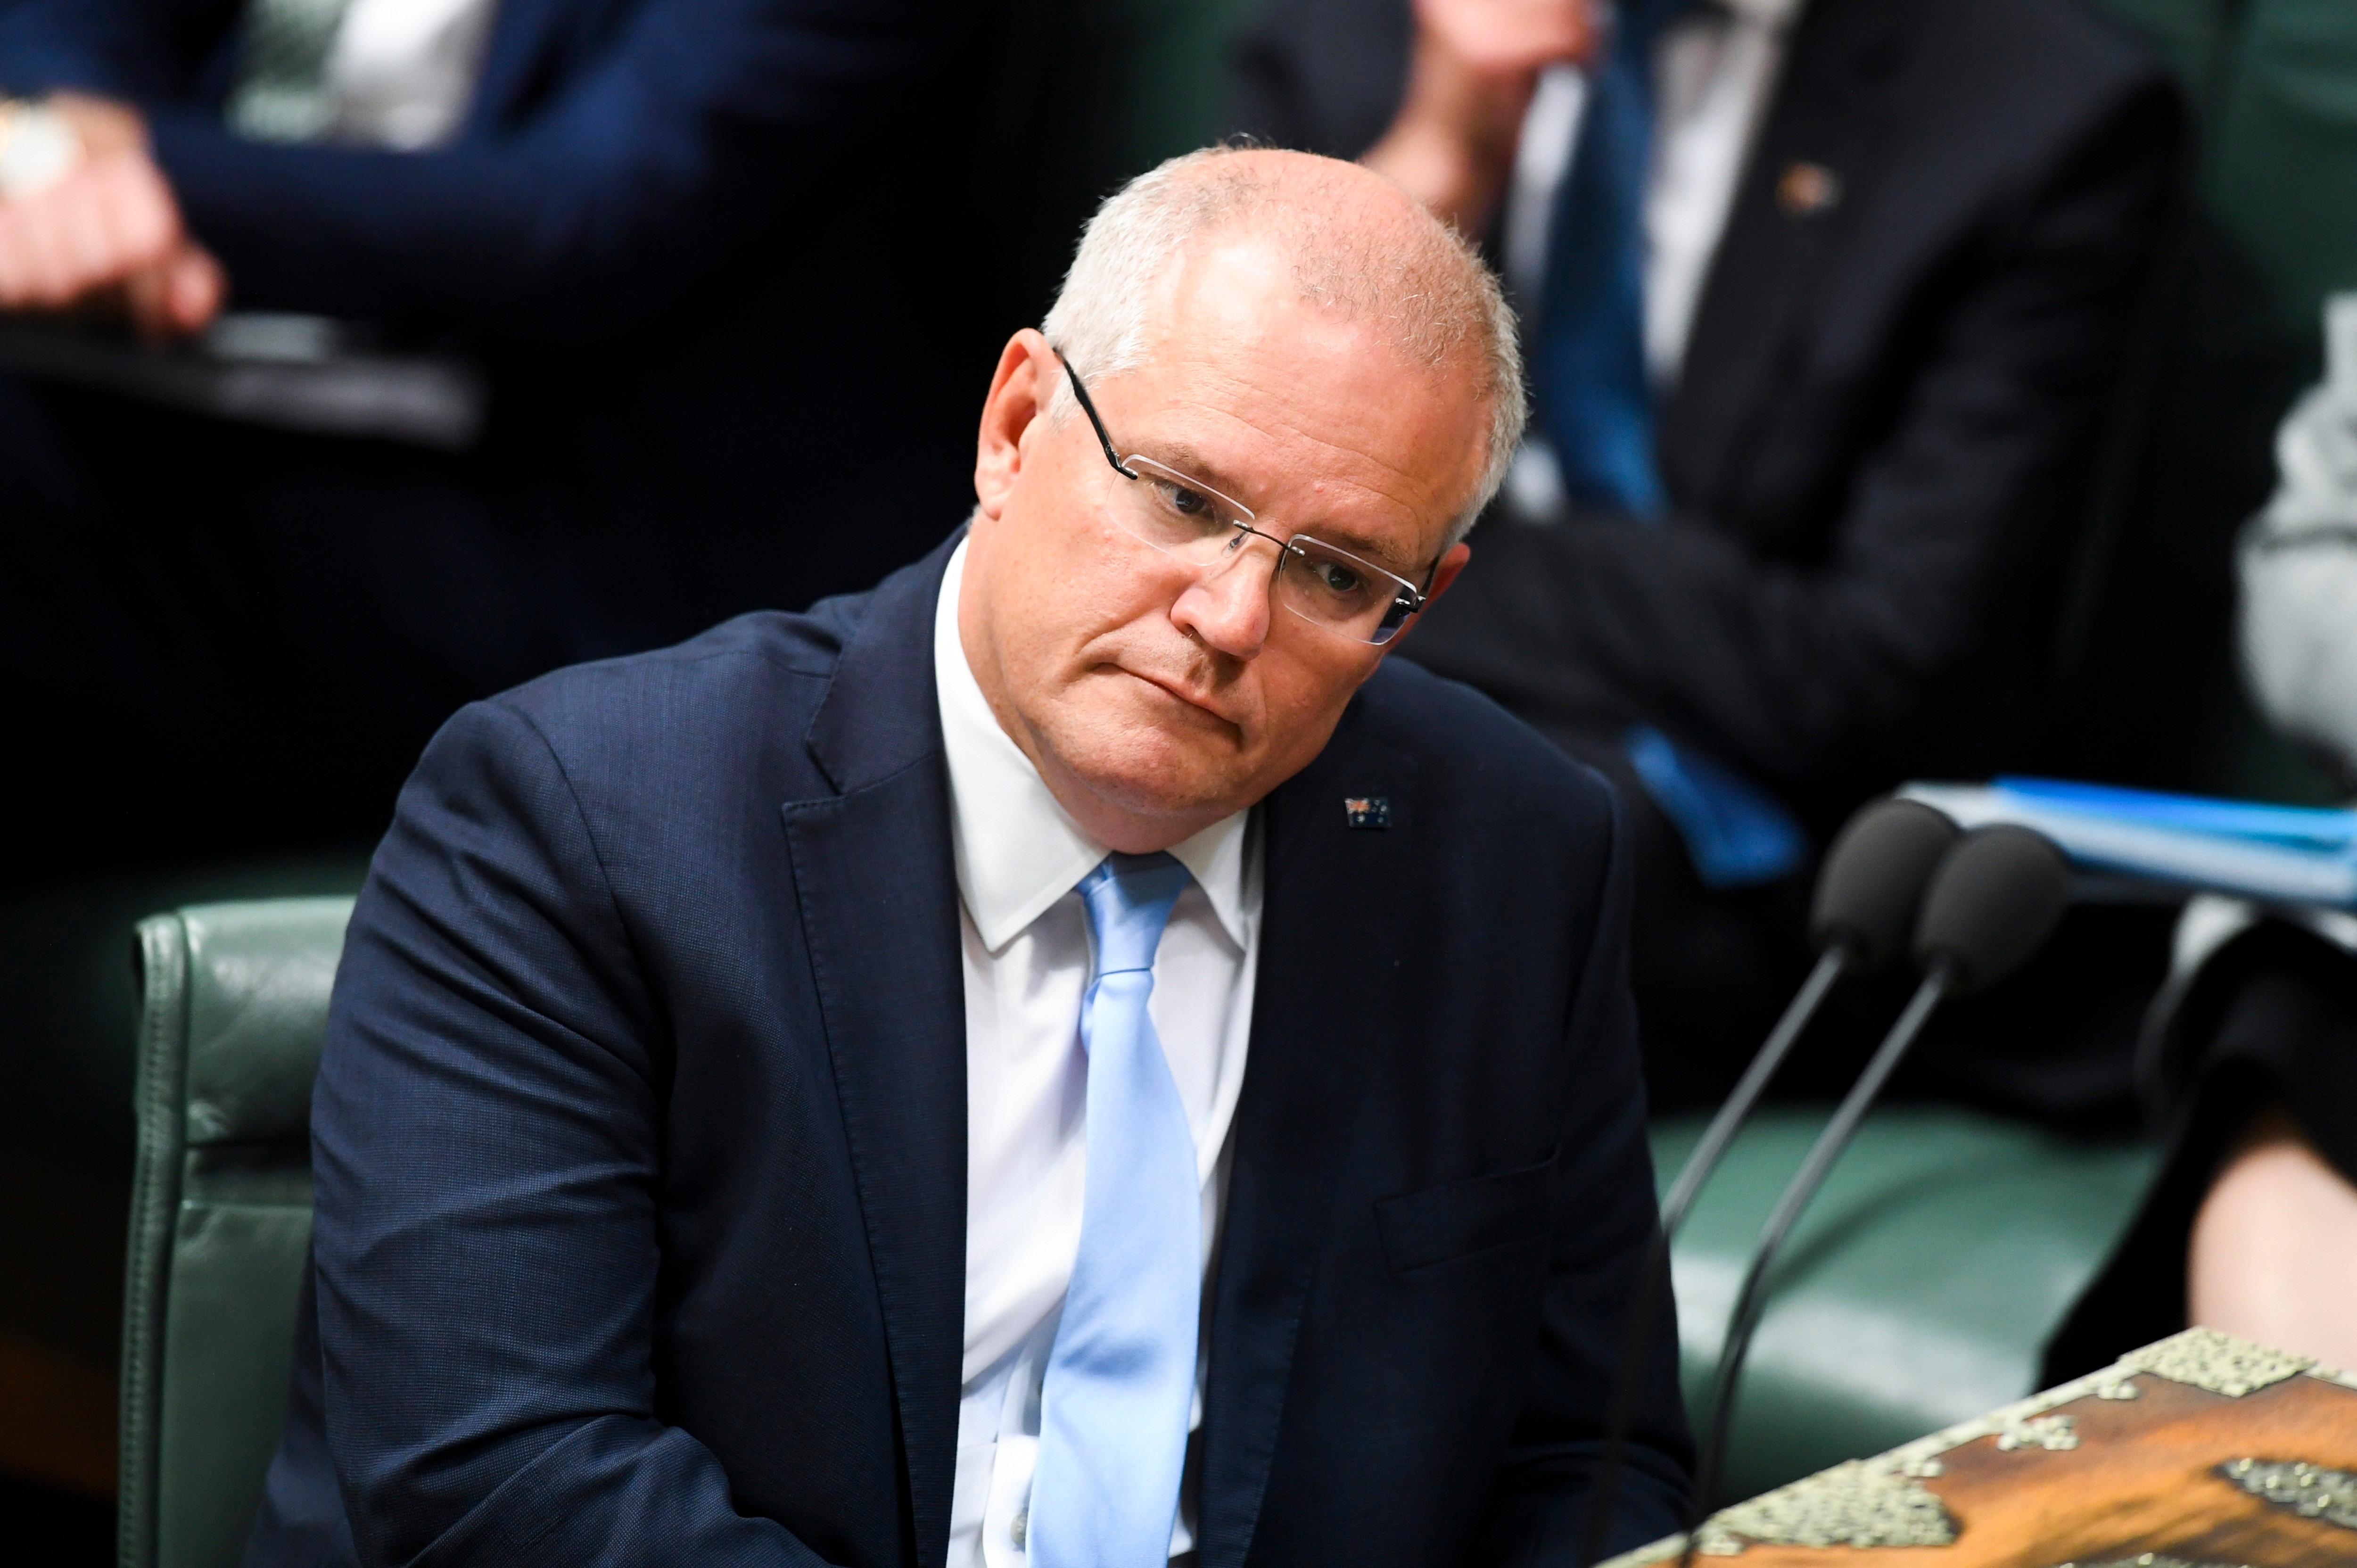 Australian Prime Minister Scott Morrison reacts during House of Representatives Question Time at Parliament House in Canberra.